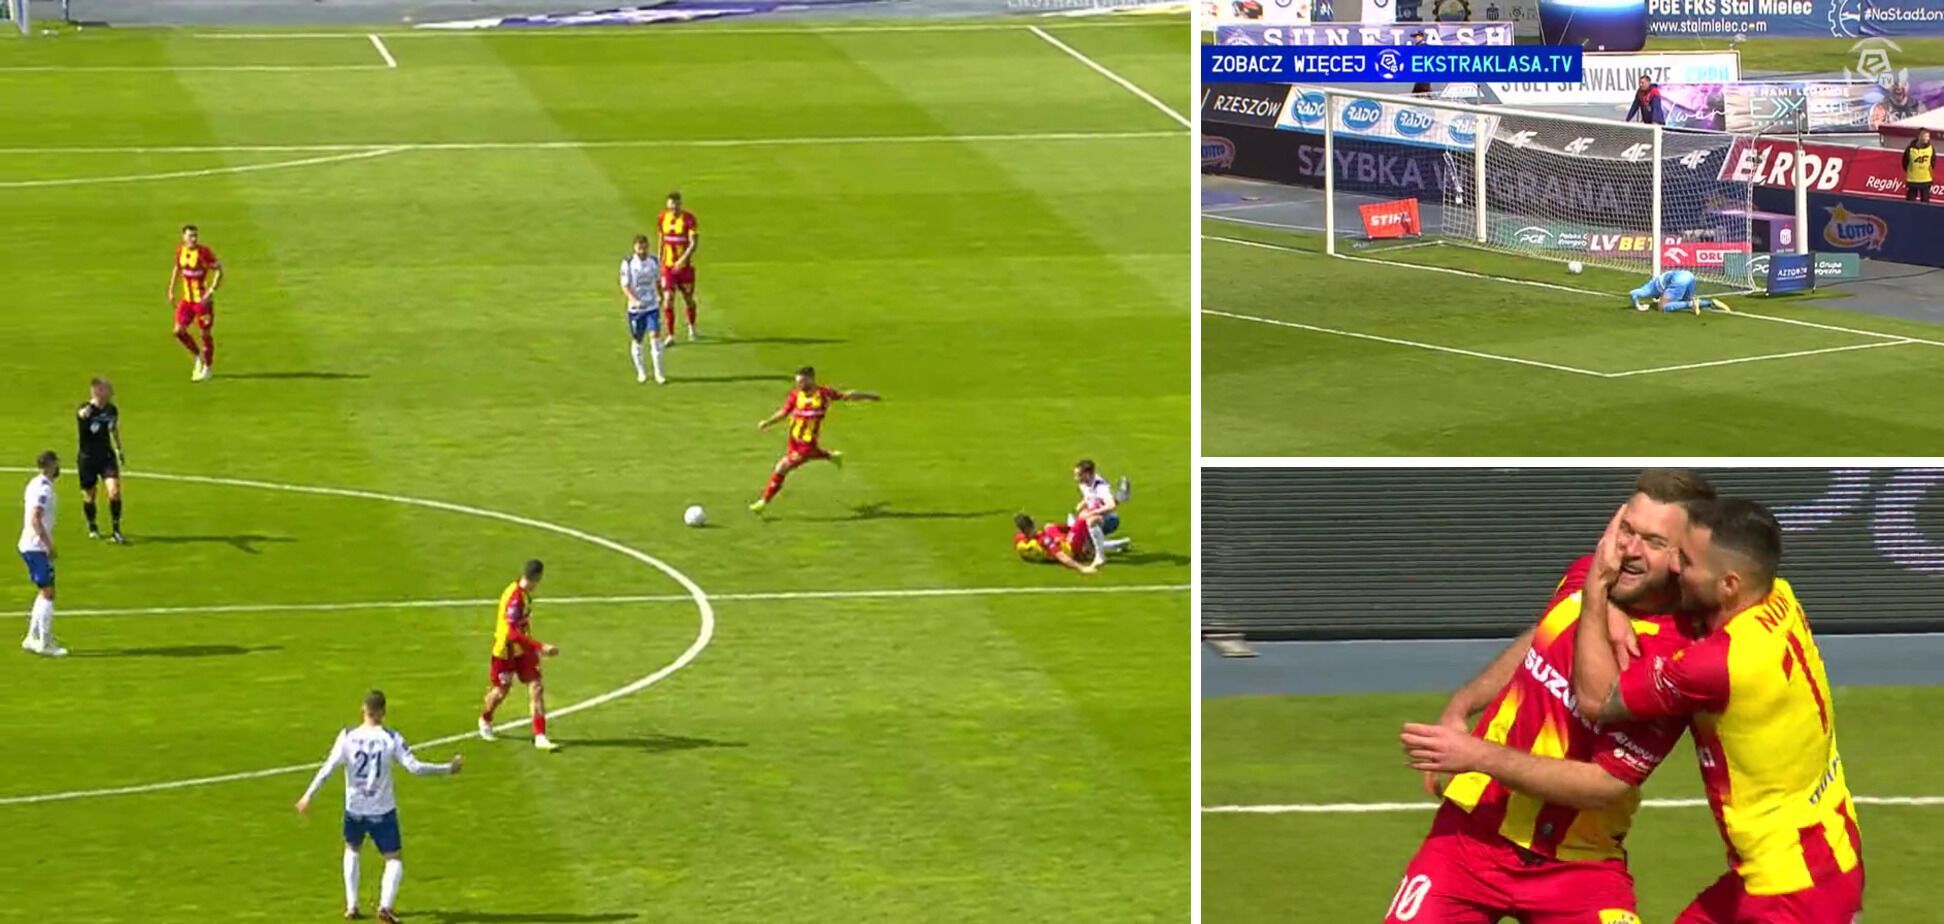 €55 million goalkeeper conceded a goal from the center of the field in his first match. Video